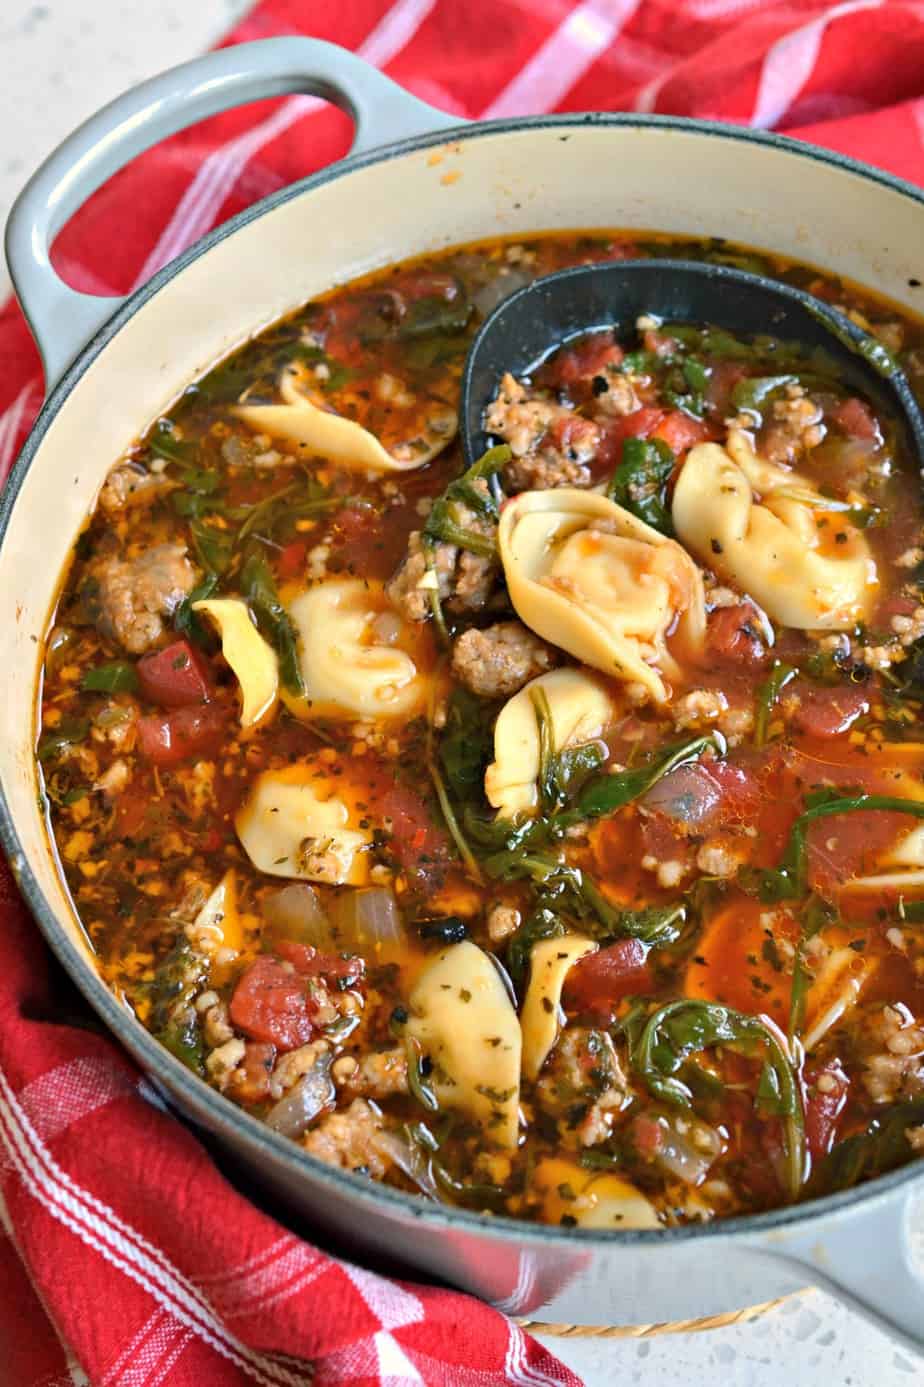 This hearty Tortellini Soup combines Italian sausage with cheese tortellini in a broth with tomatoes, onions, and garlic. 